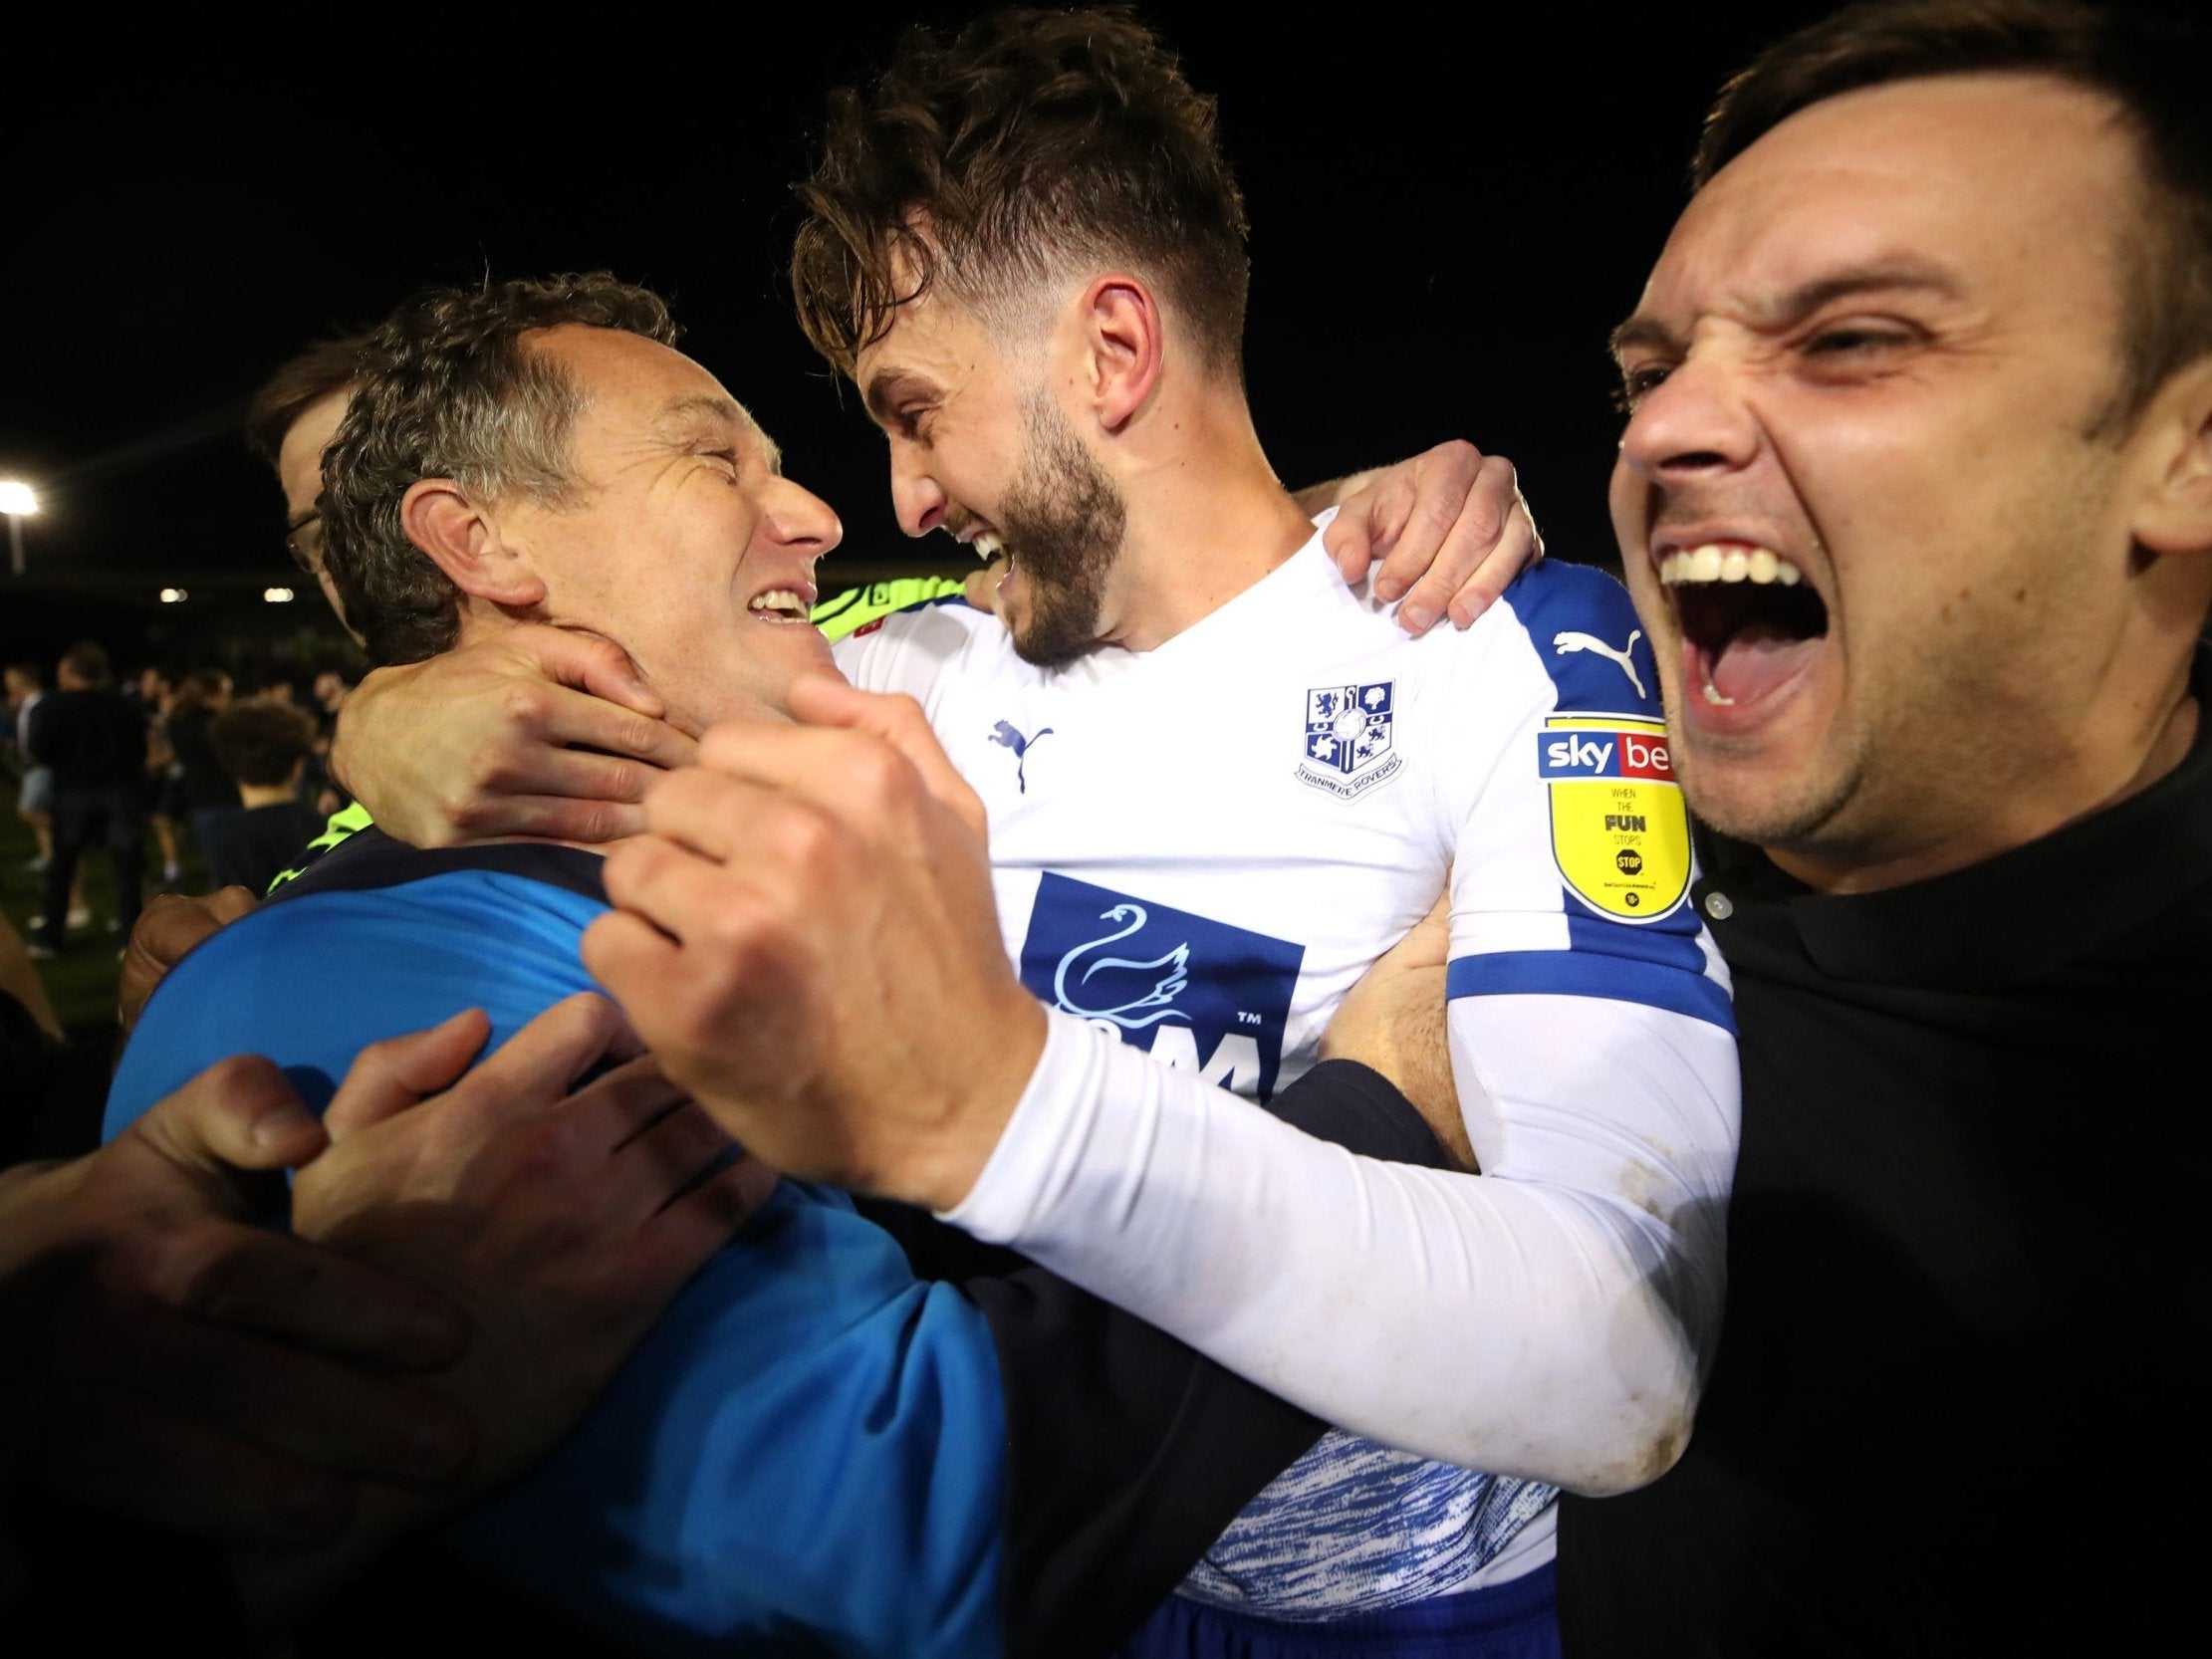 Tramere Rovers manager Micky Mellon and Ollie Banks celebrate victory after beating Forest Green Rovers